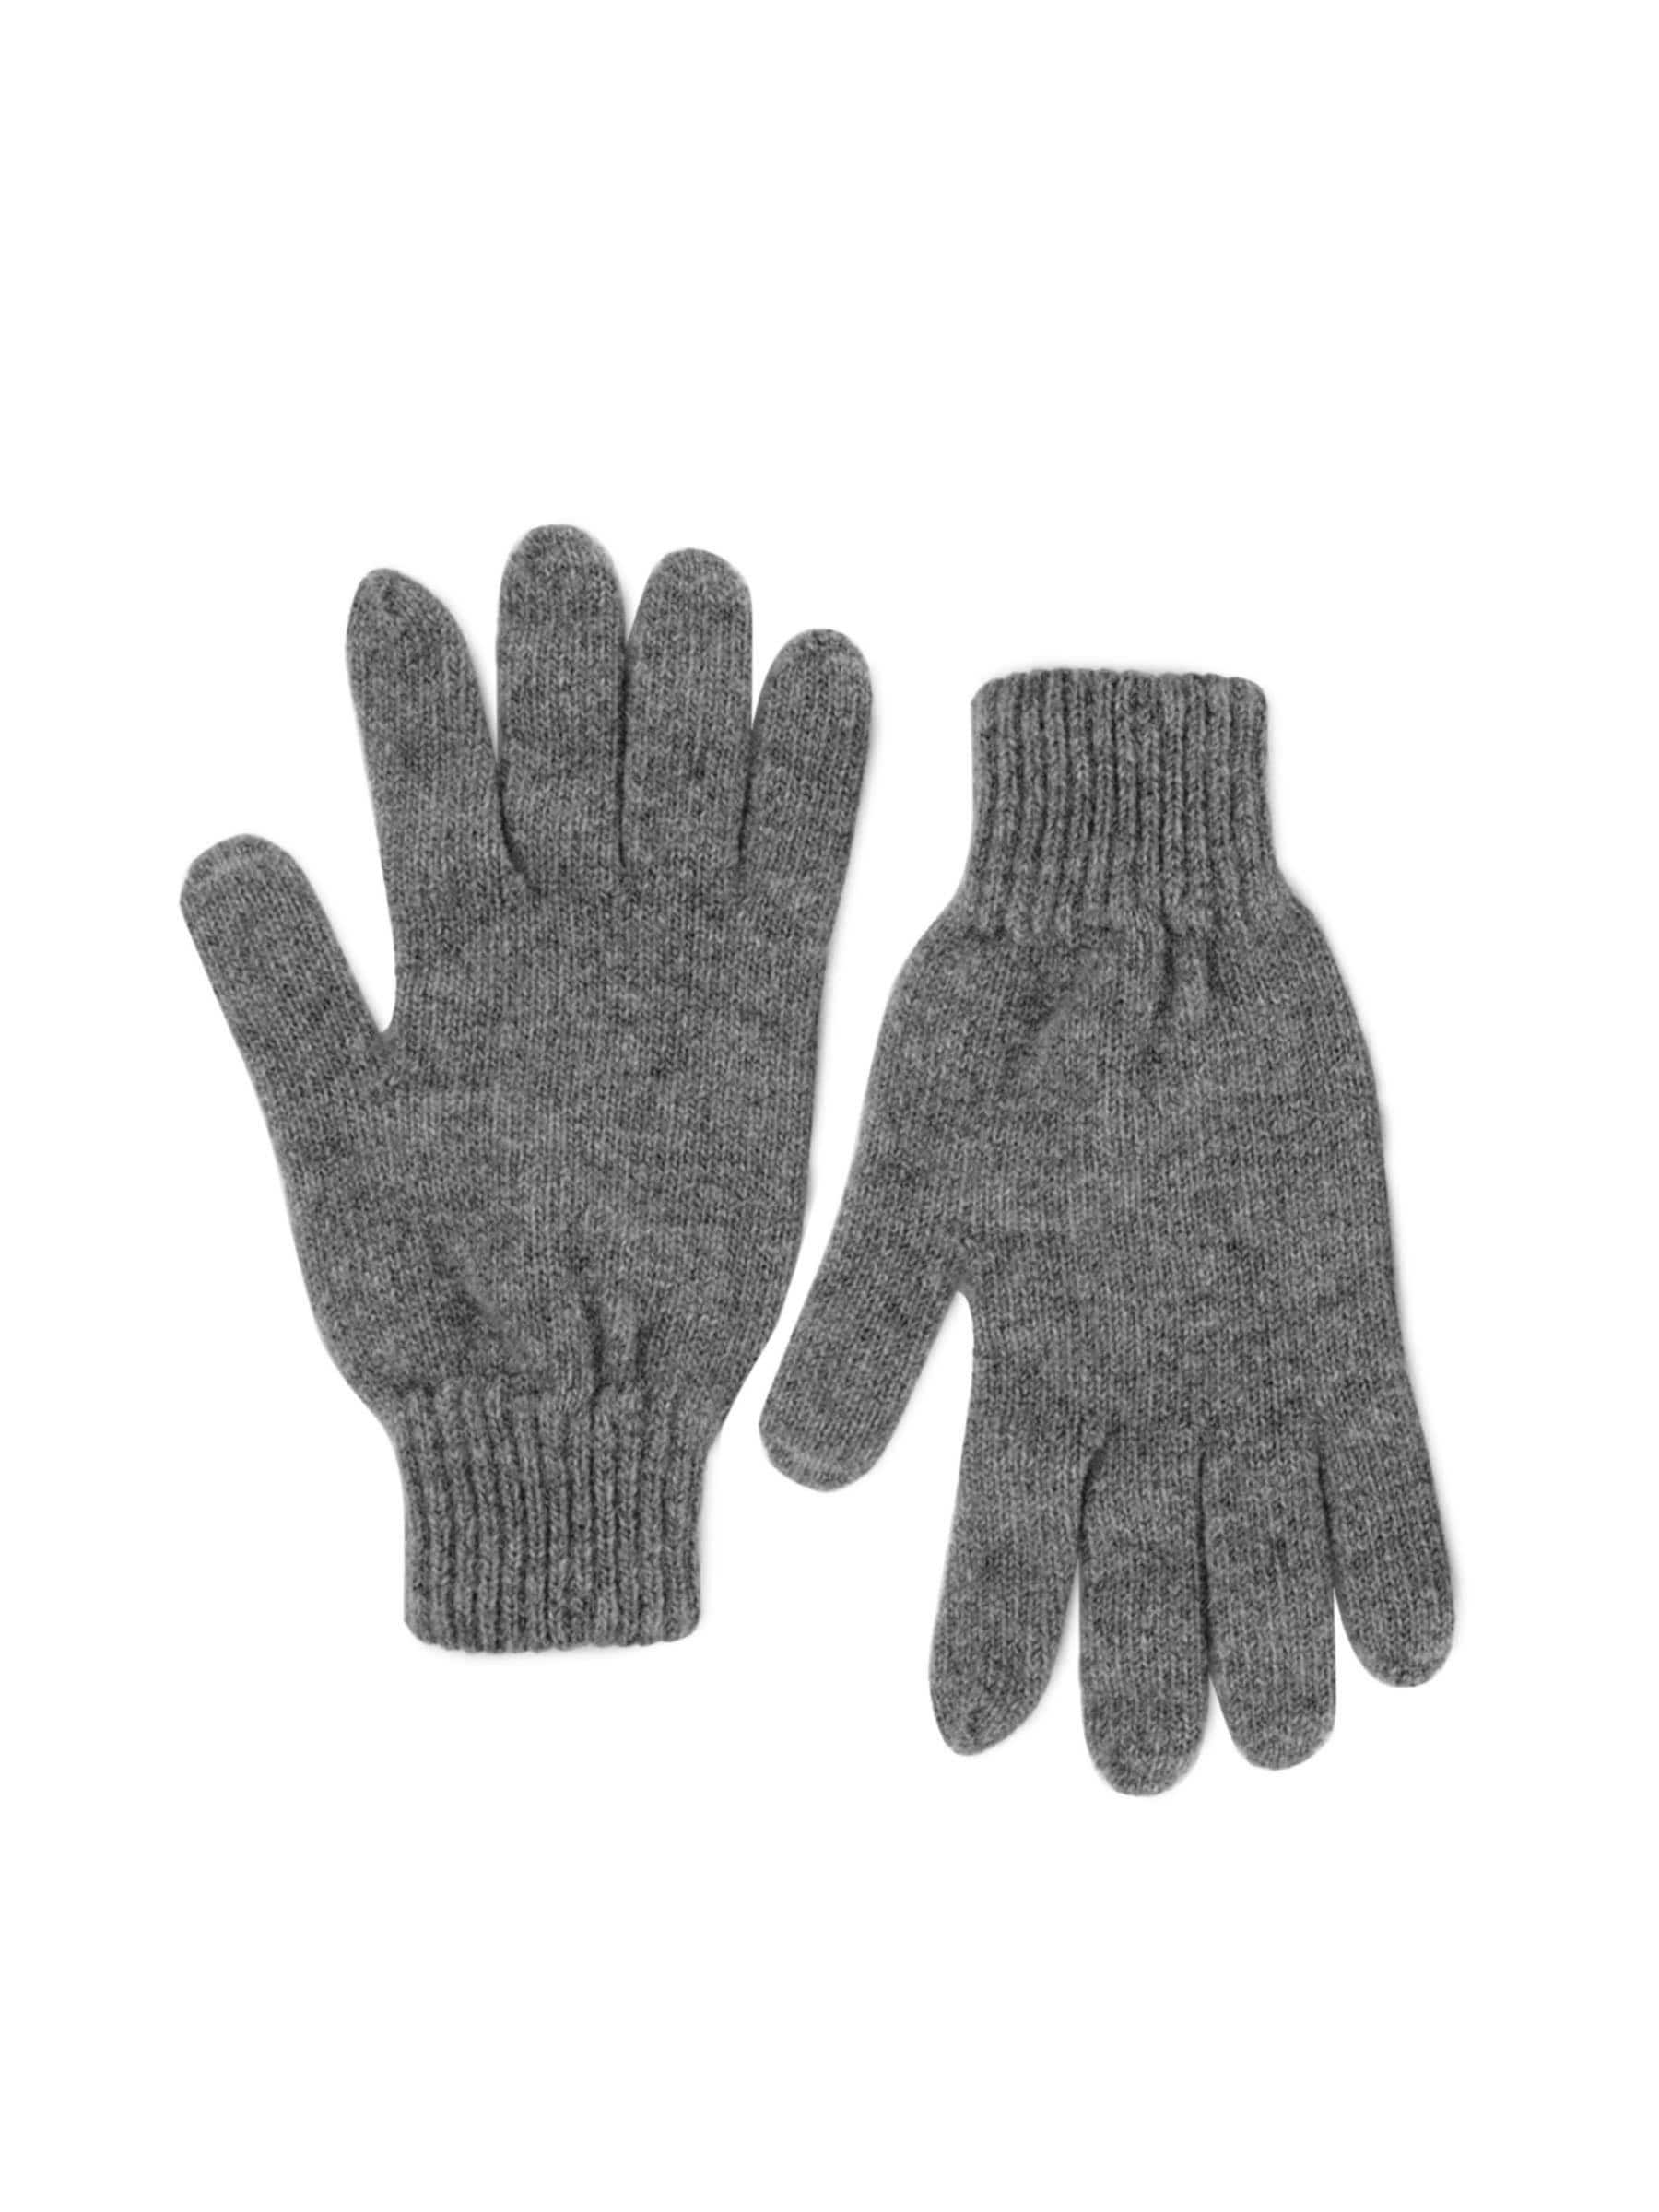 United Colors of Benetton Men Solid Grey Gloves